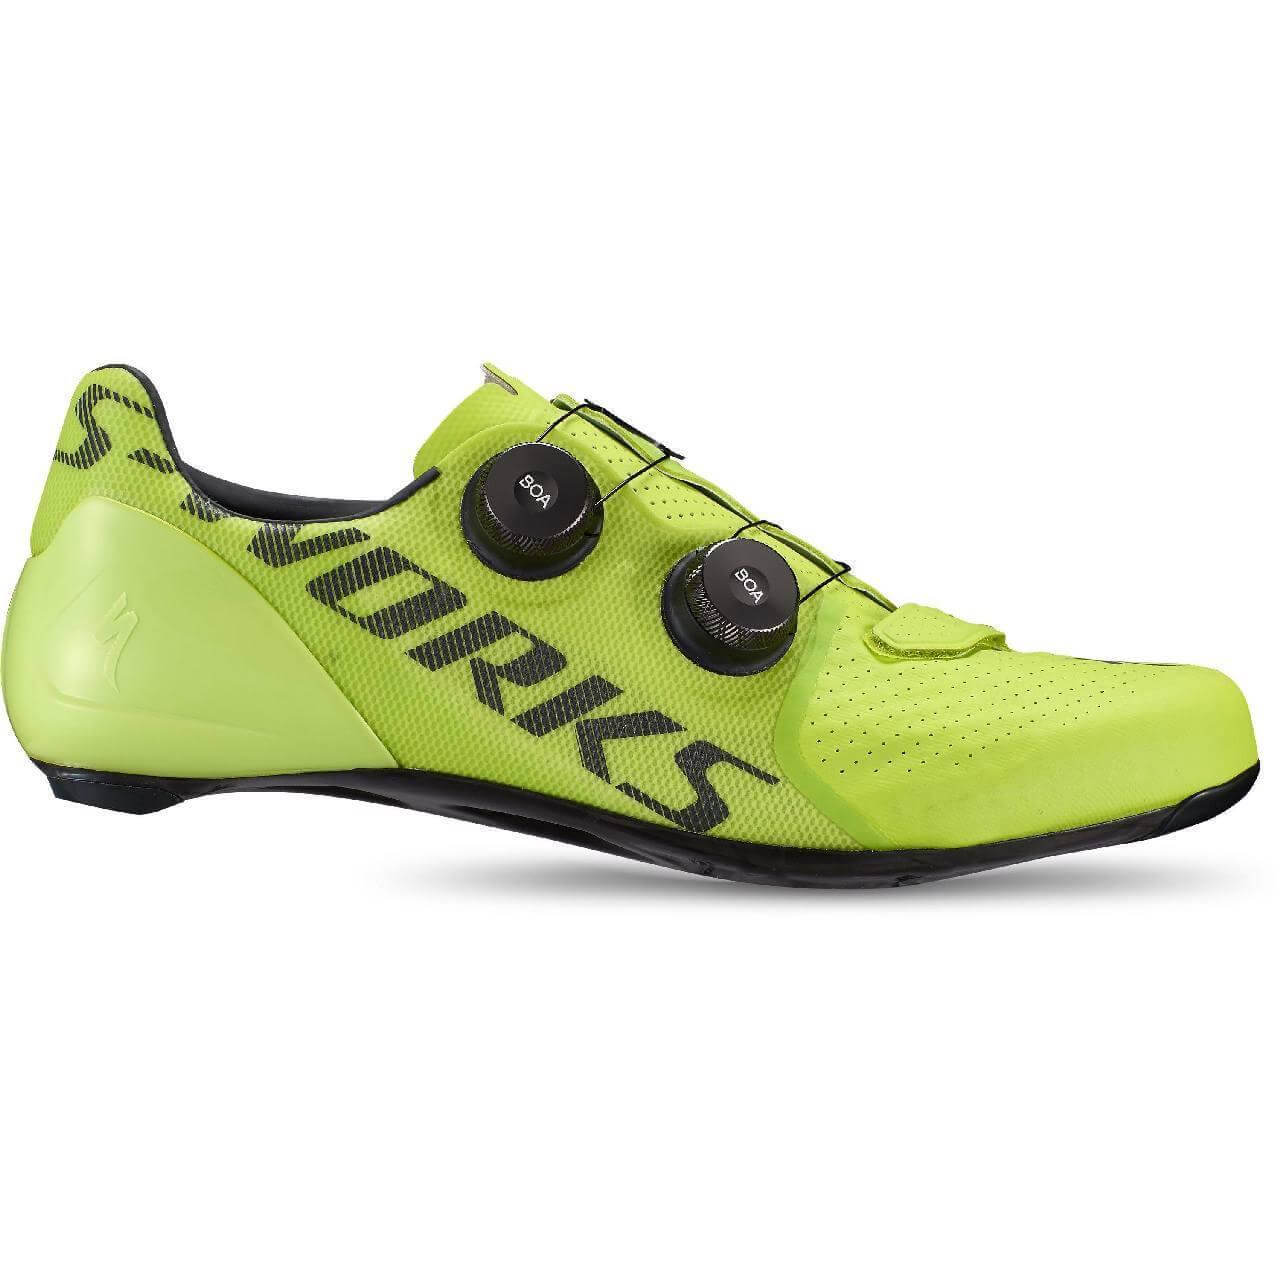 S-Works 7 Road Shoe